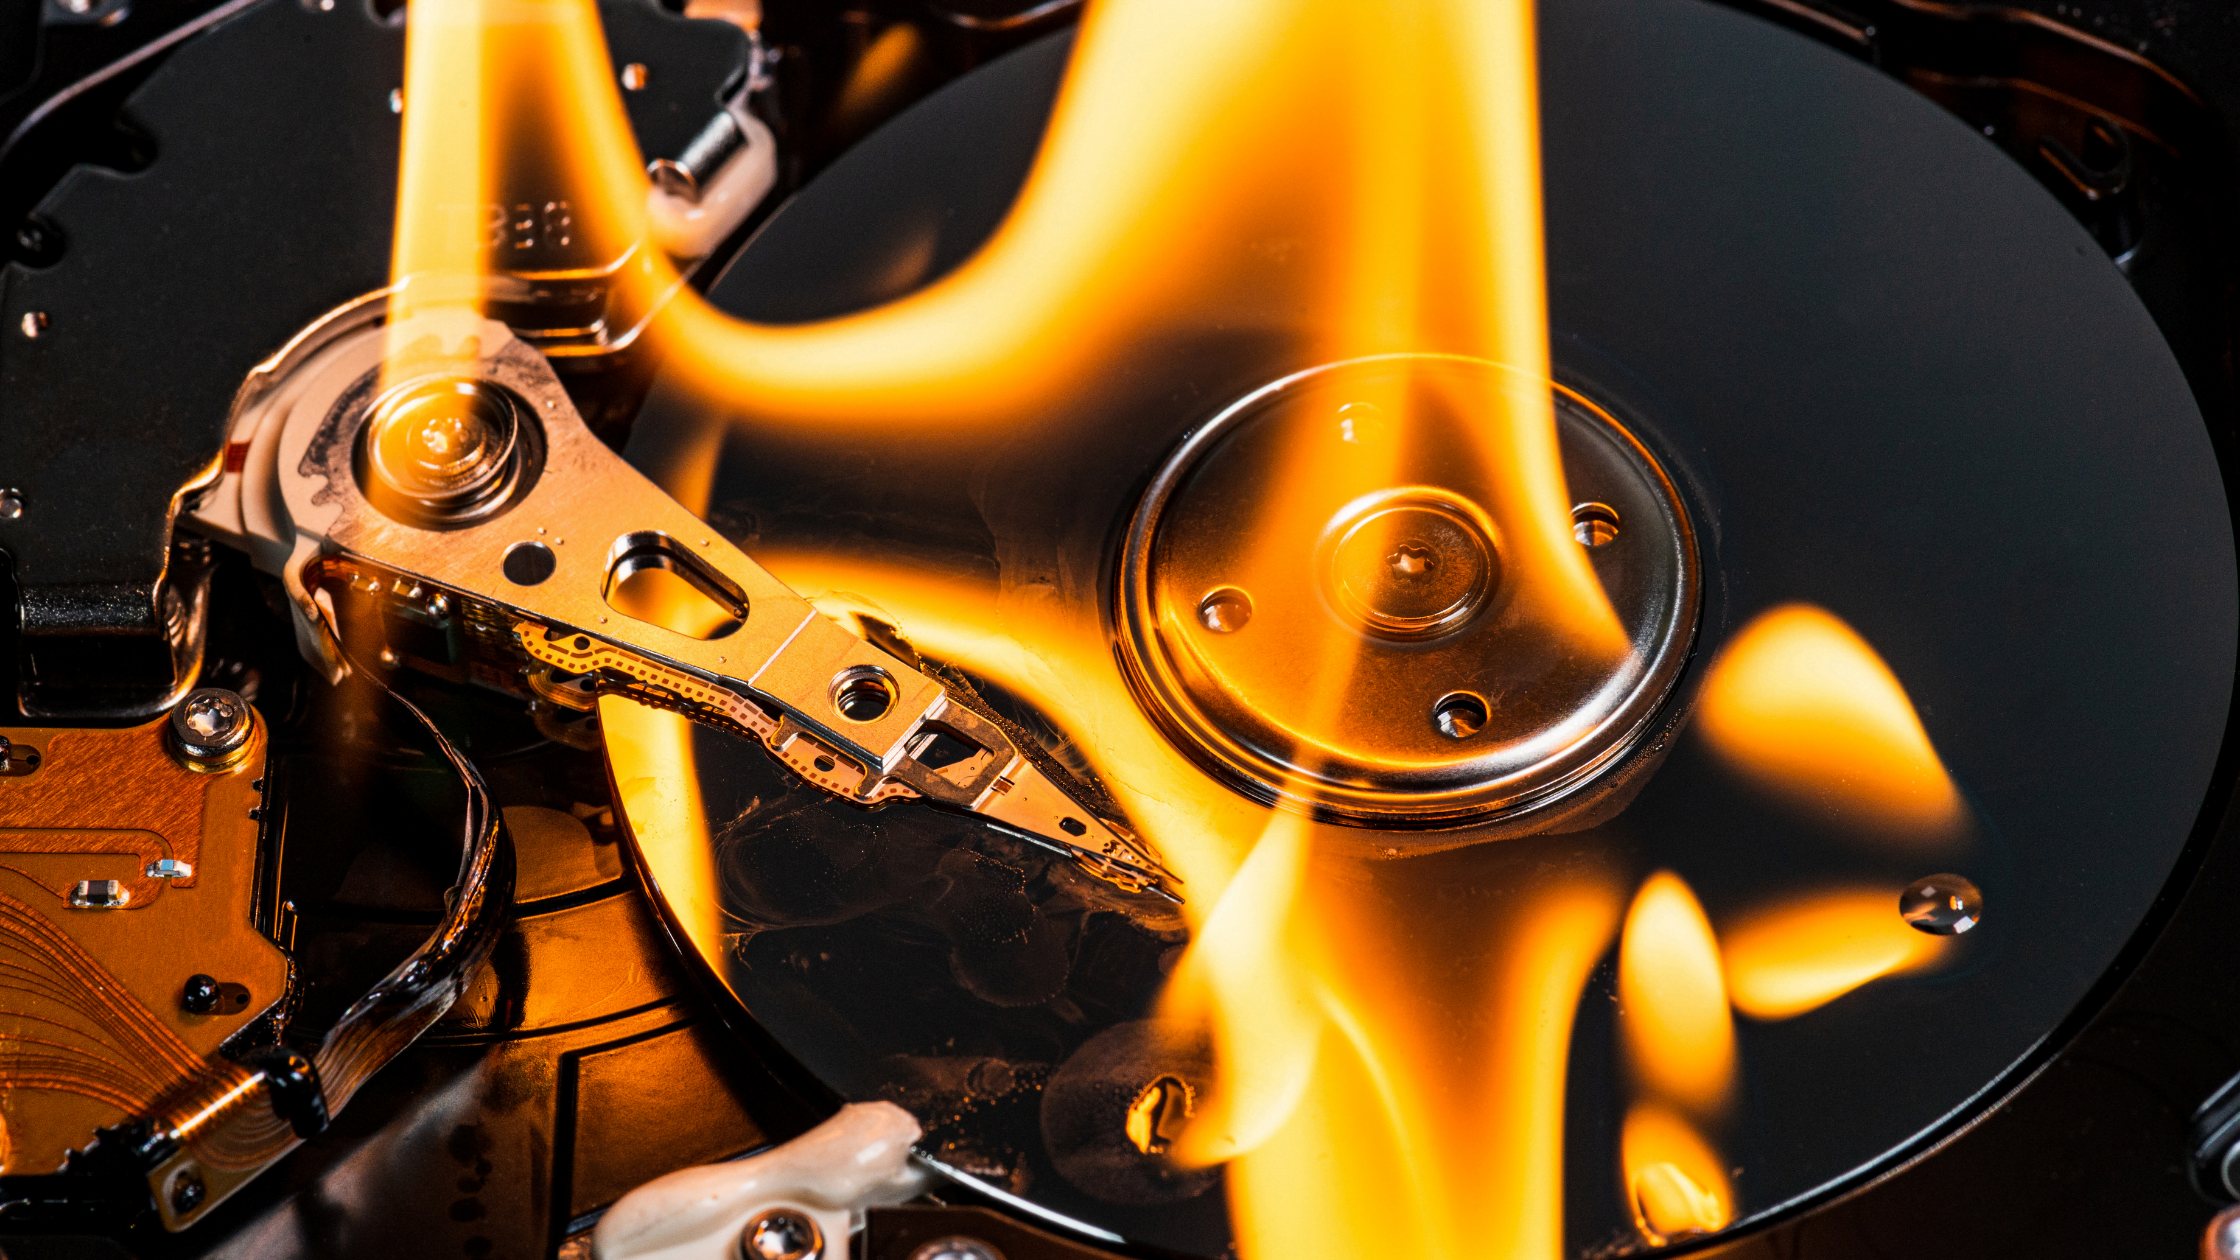 Hard drive being incinerated as part of data destruction strategy